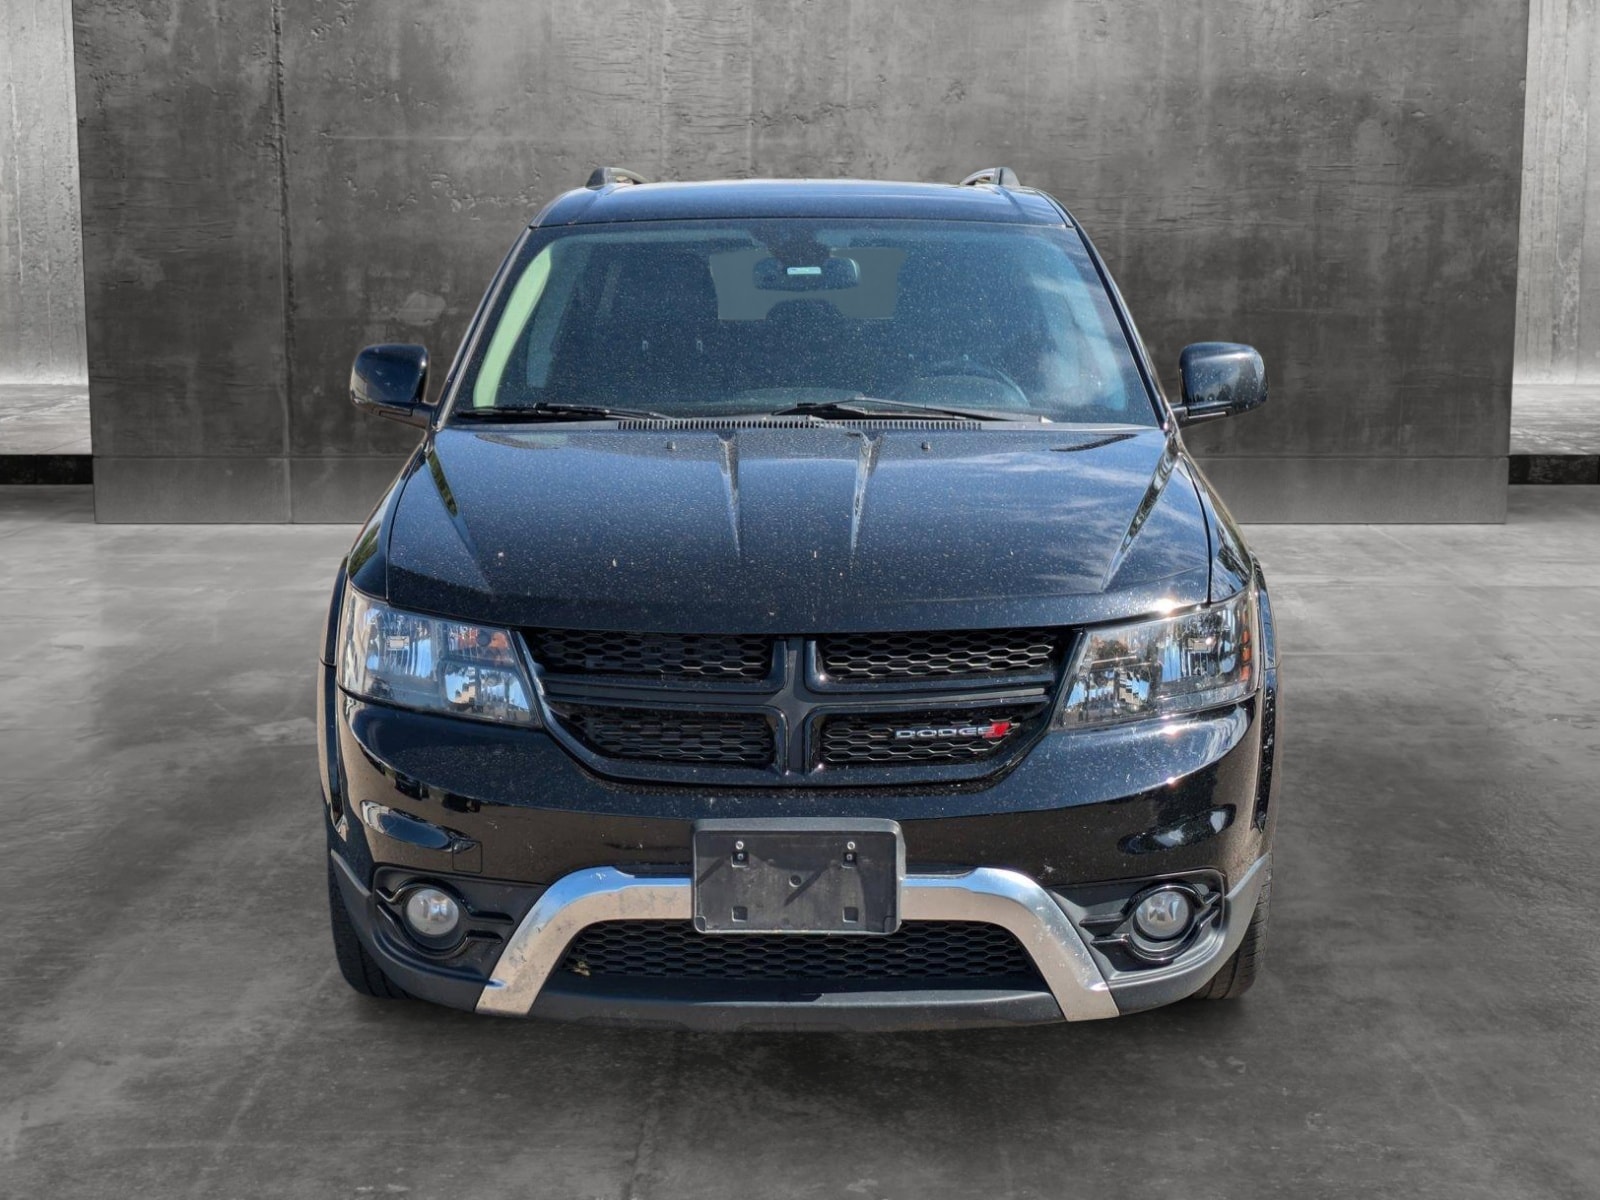 Used 2019 Dodge Journey Crossroad with VIN 3C4PDDGG1KT858564 for sale in Canon City, CO